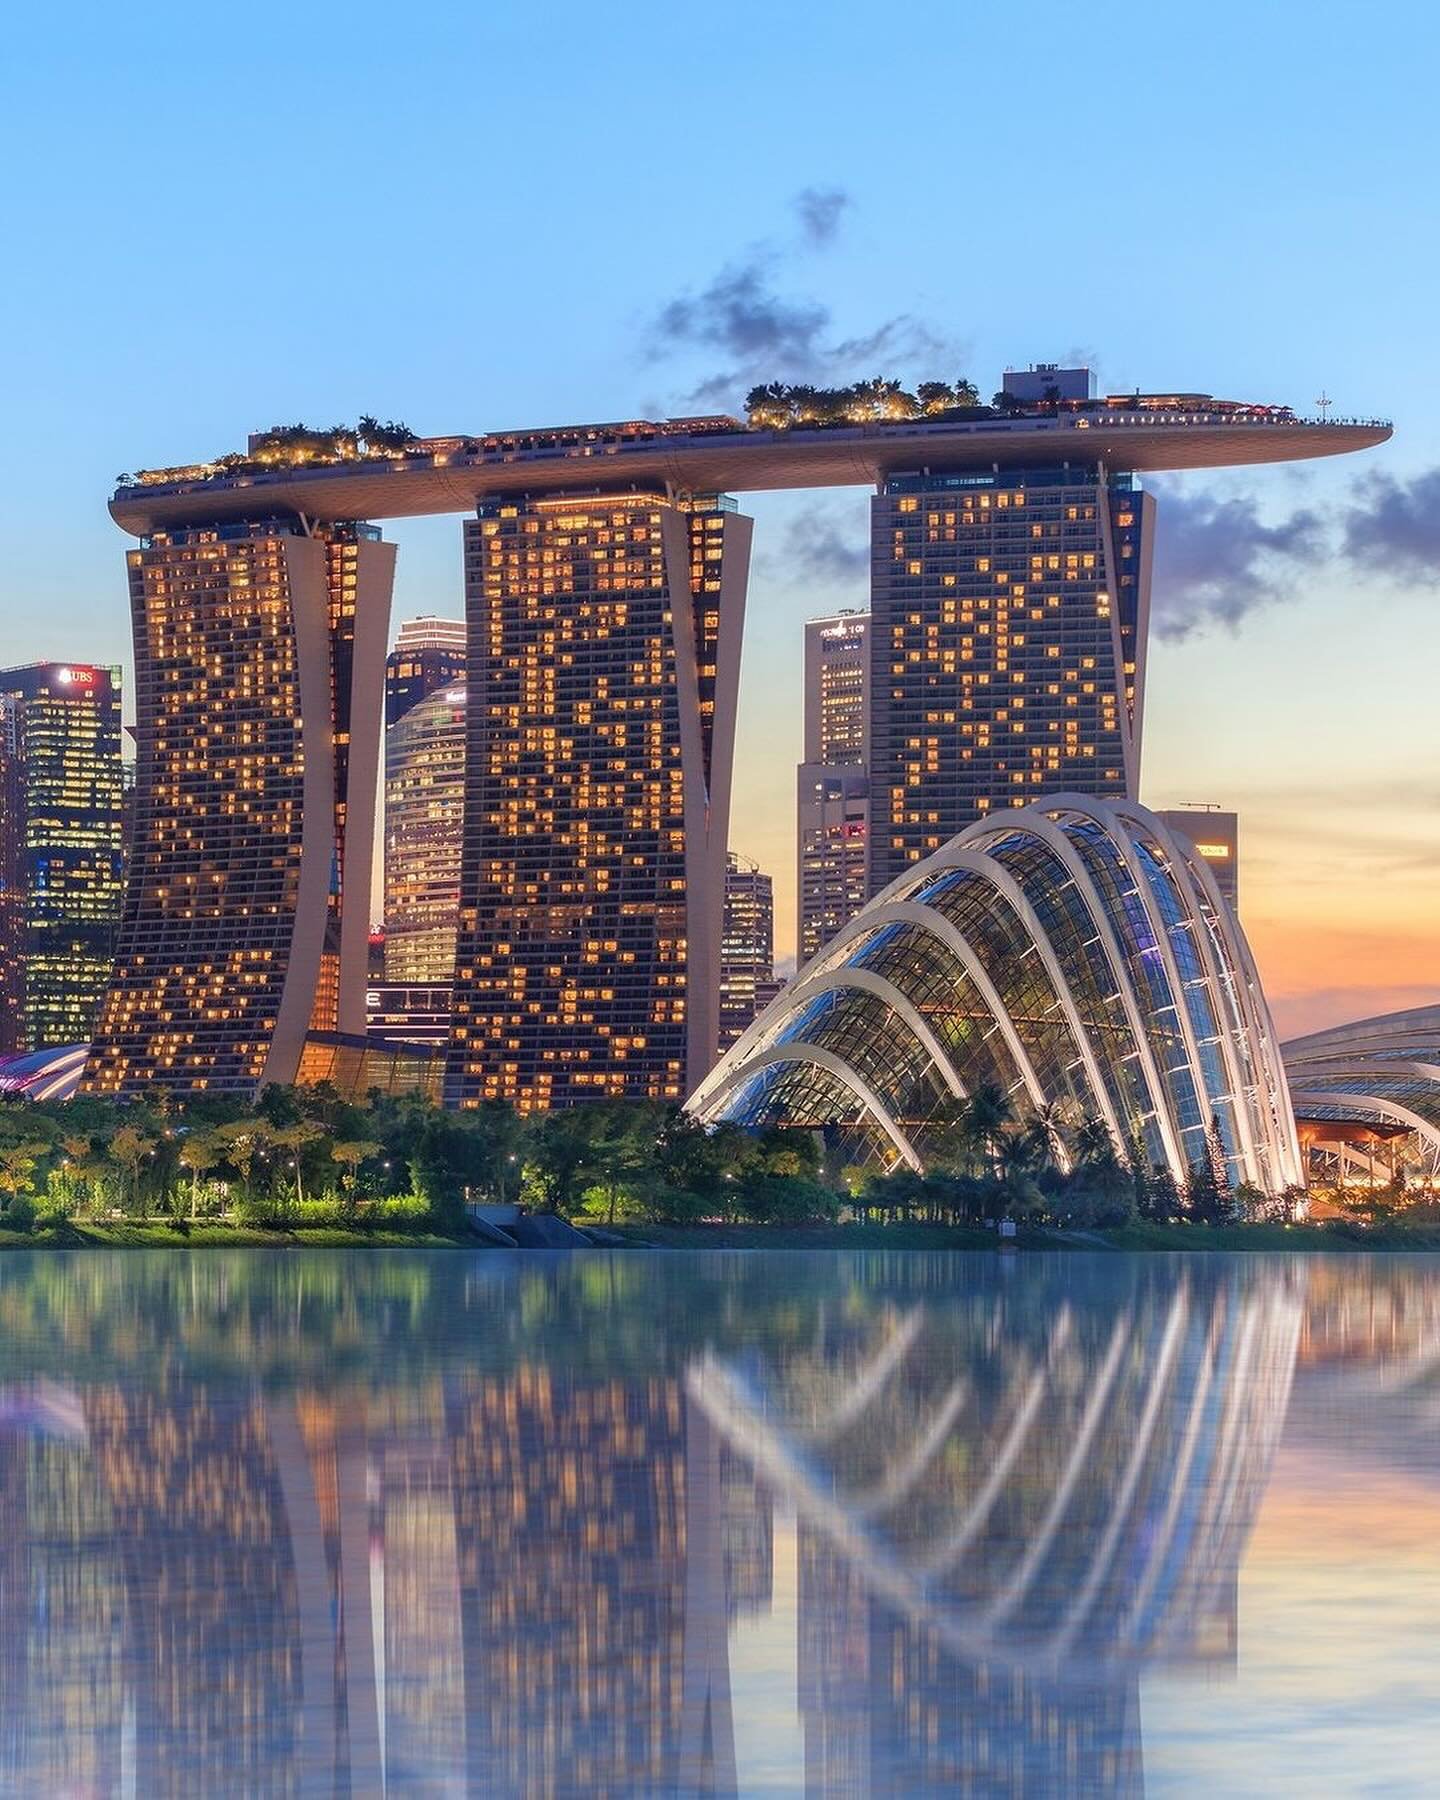 😍Sky High! From rooftop pools, hanging gardens to highly rated hotels!🥰

Marina Bay Sands, Hanging Gardens Bali and W Bali - Seminyak

Singapore(3 Nights), Bali(3 Nights) and Bali(7 Nights)
13 Nights - 2 Adults

Based on 2 adults sharing a Sands Pr